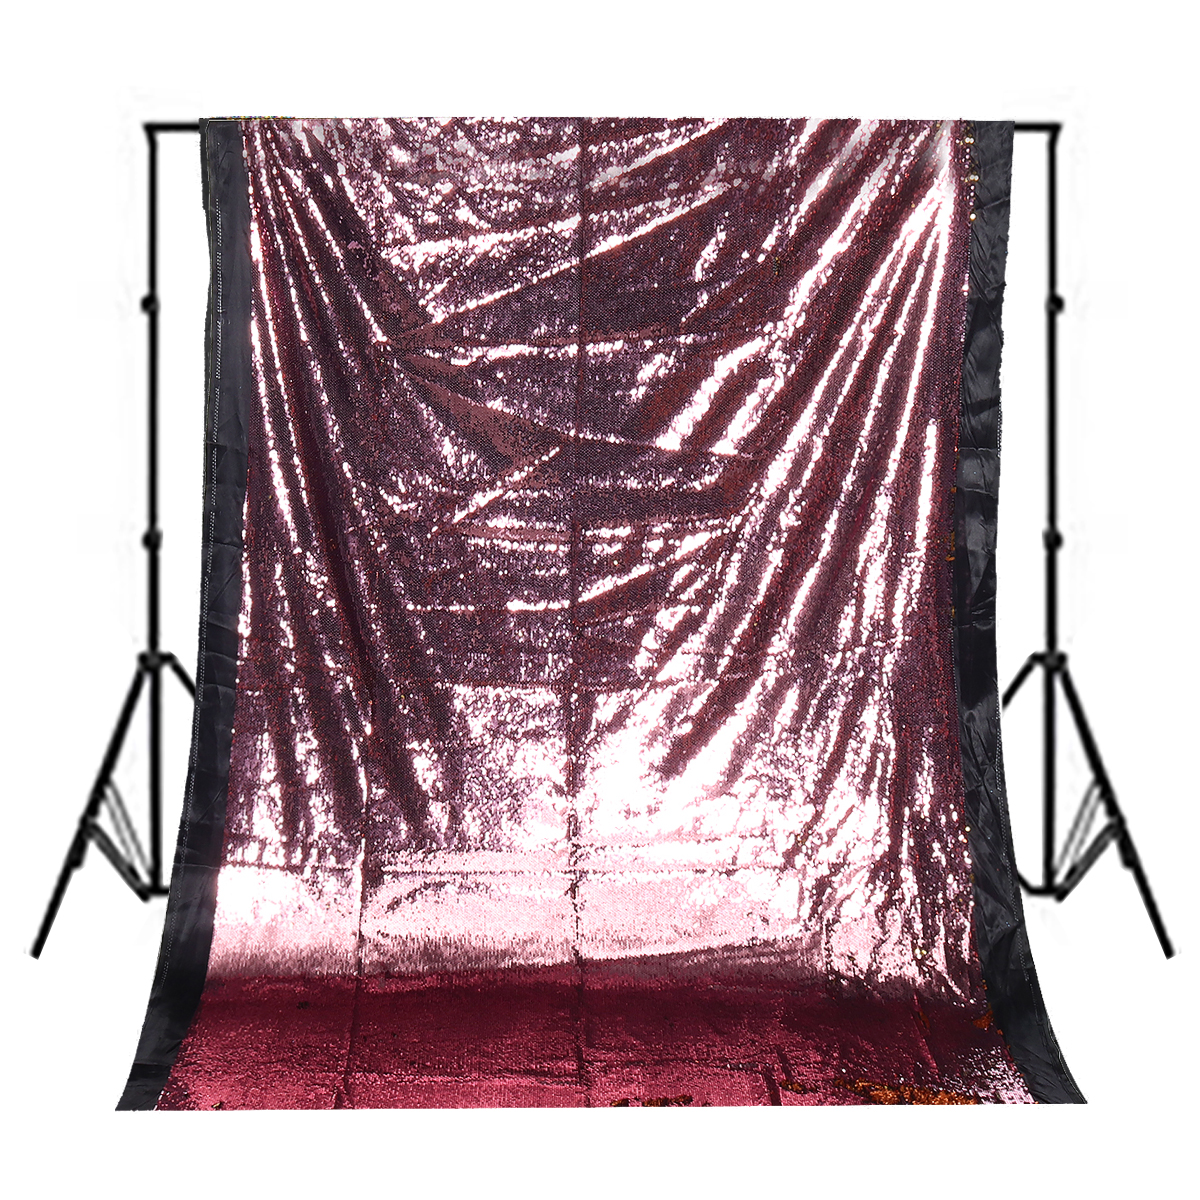 13x19m-Glitter-Sequin-Fabric-Photography-Backdrop-Curtain-Wedding-Party-Decor-1627473-6